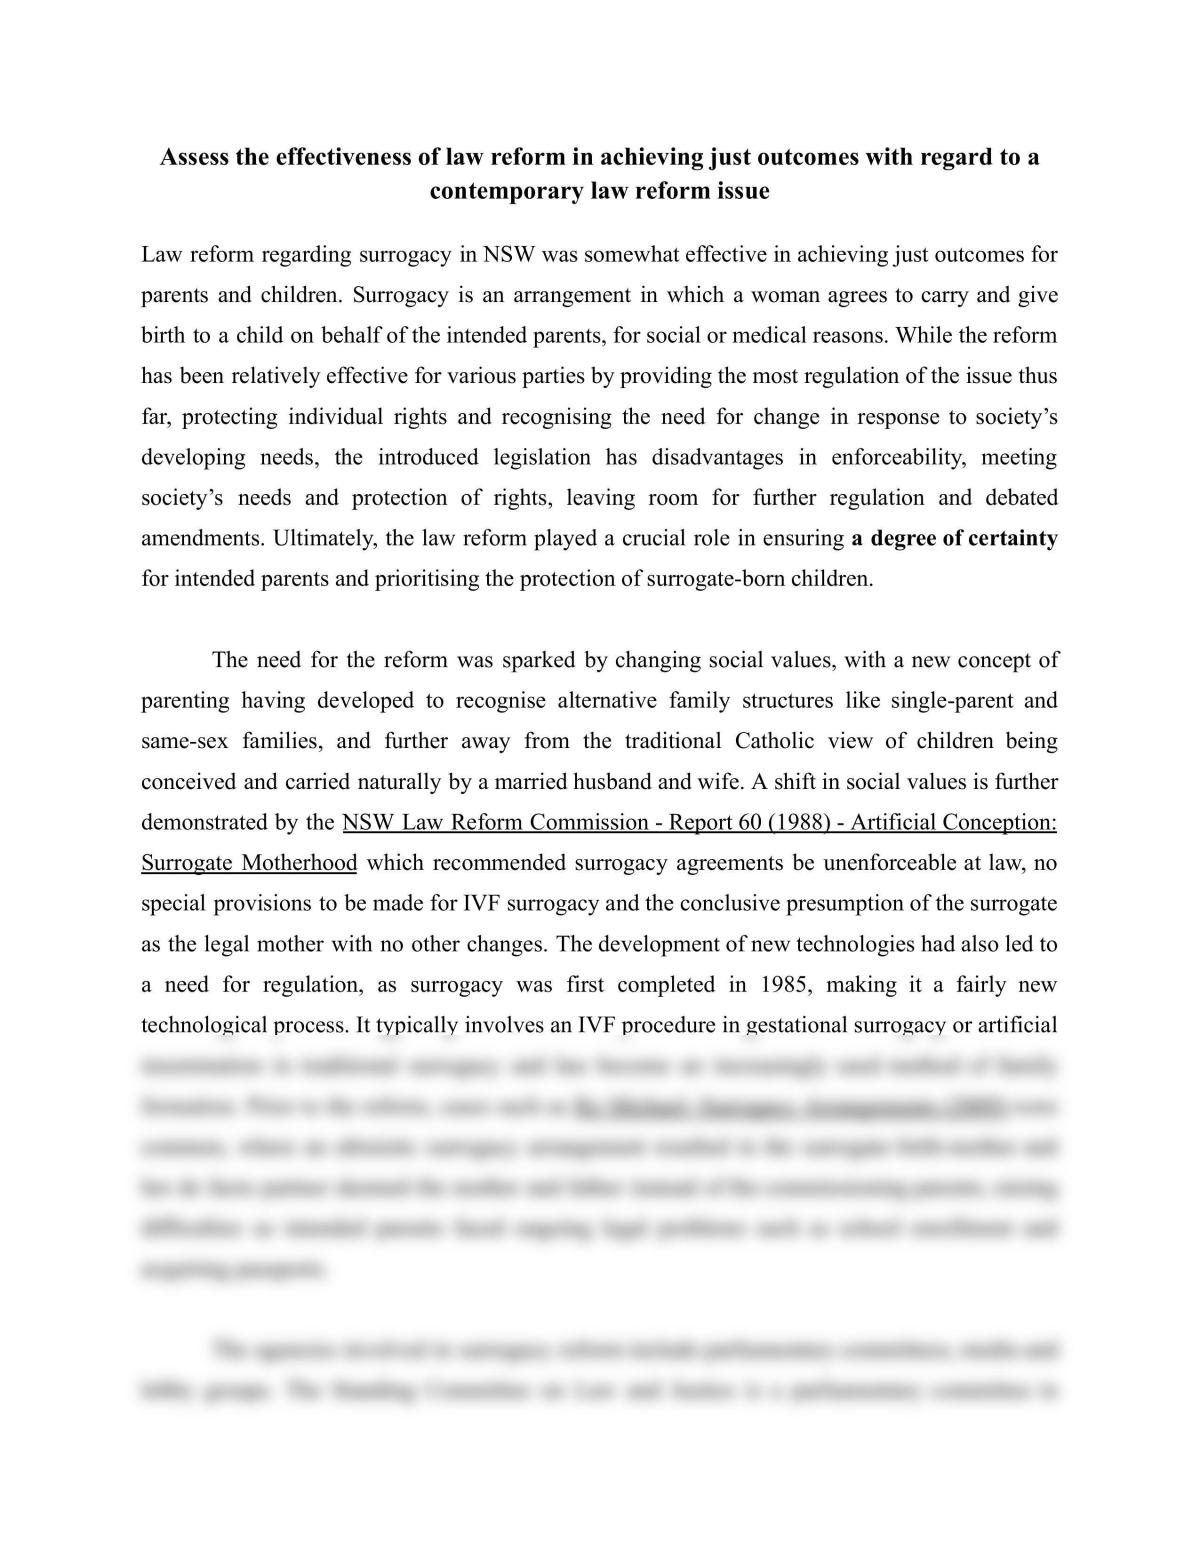 Birth Technologies and Surrogacy Law Reform Essay - Page 1